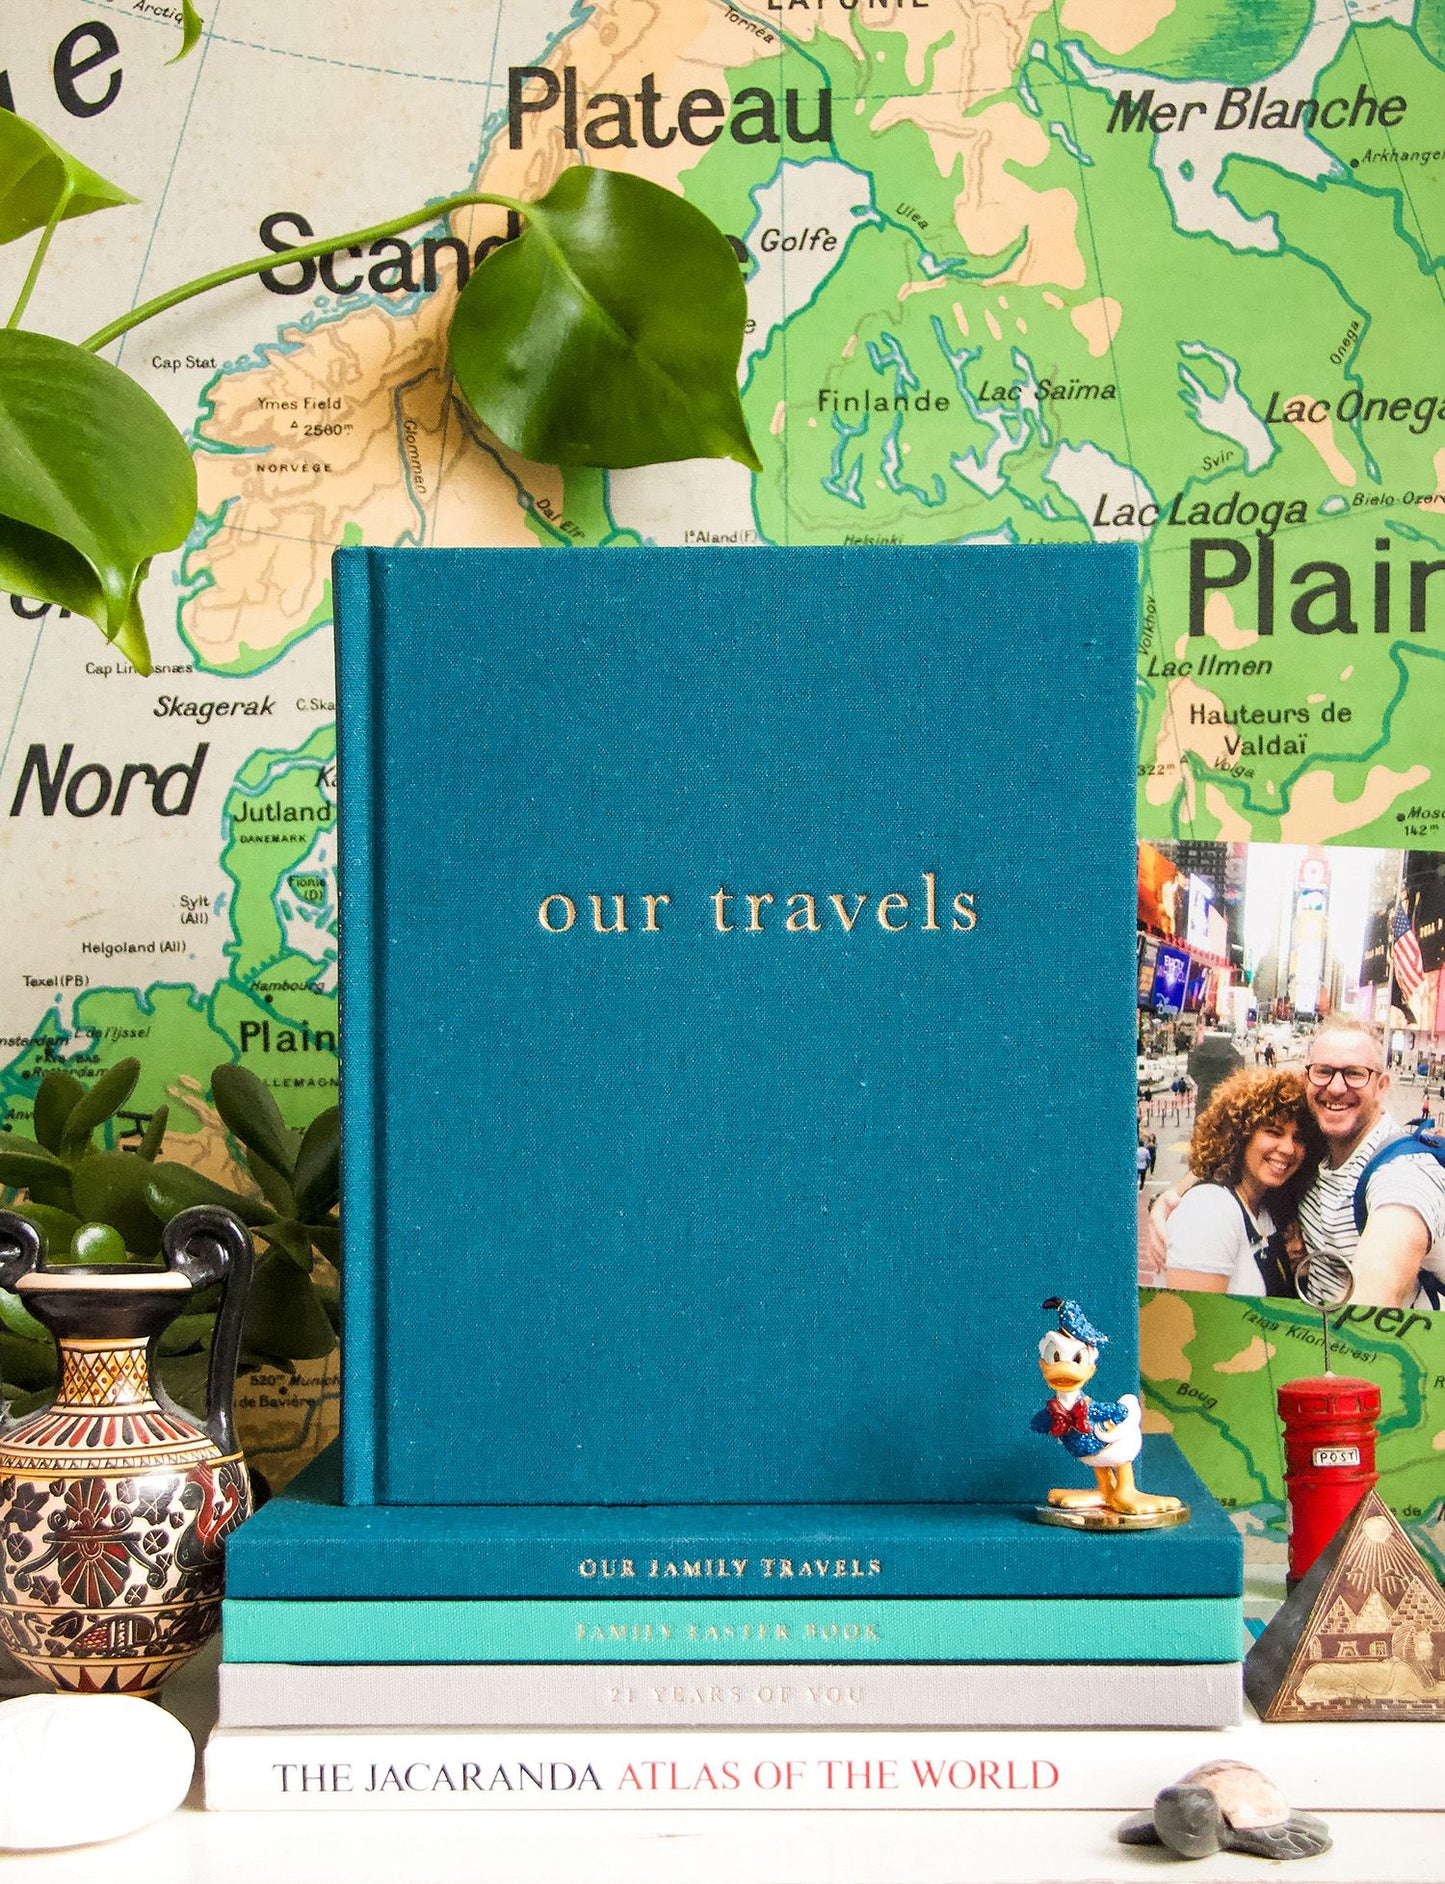 Create a family heirloom by documenting in words and photos time spent travelling together as a family. These adventures can then be recollected in all the years to come.